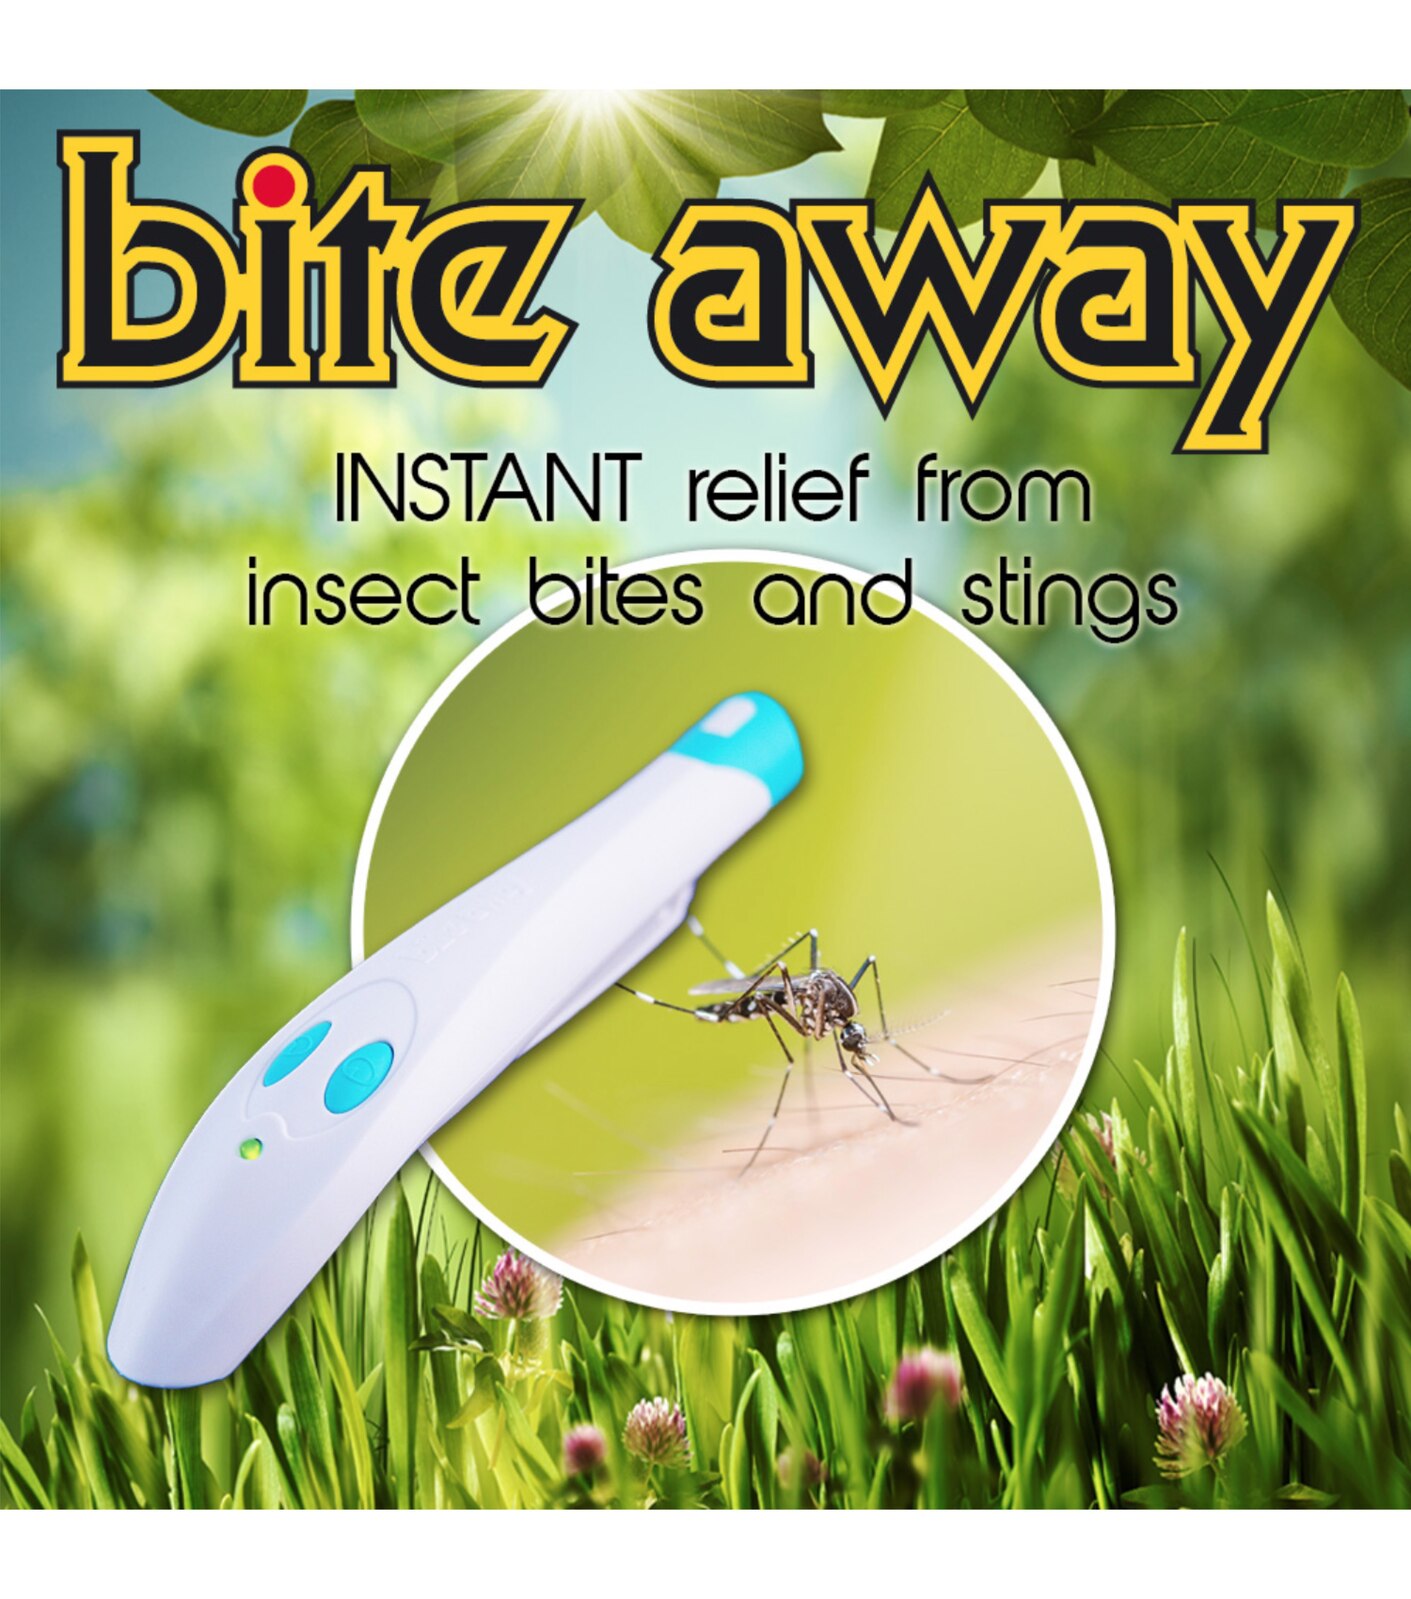 Bite Away - Insect Bite Healer by Equip Health Systems (DC9500)